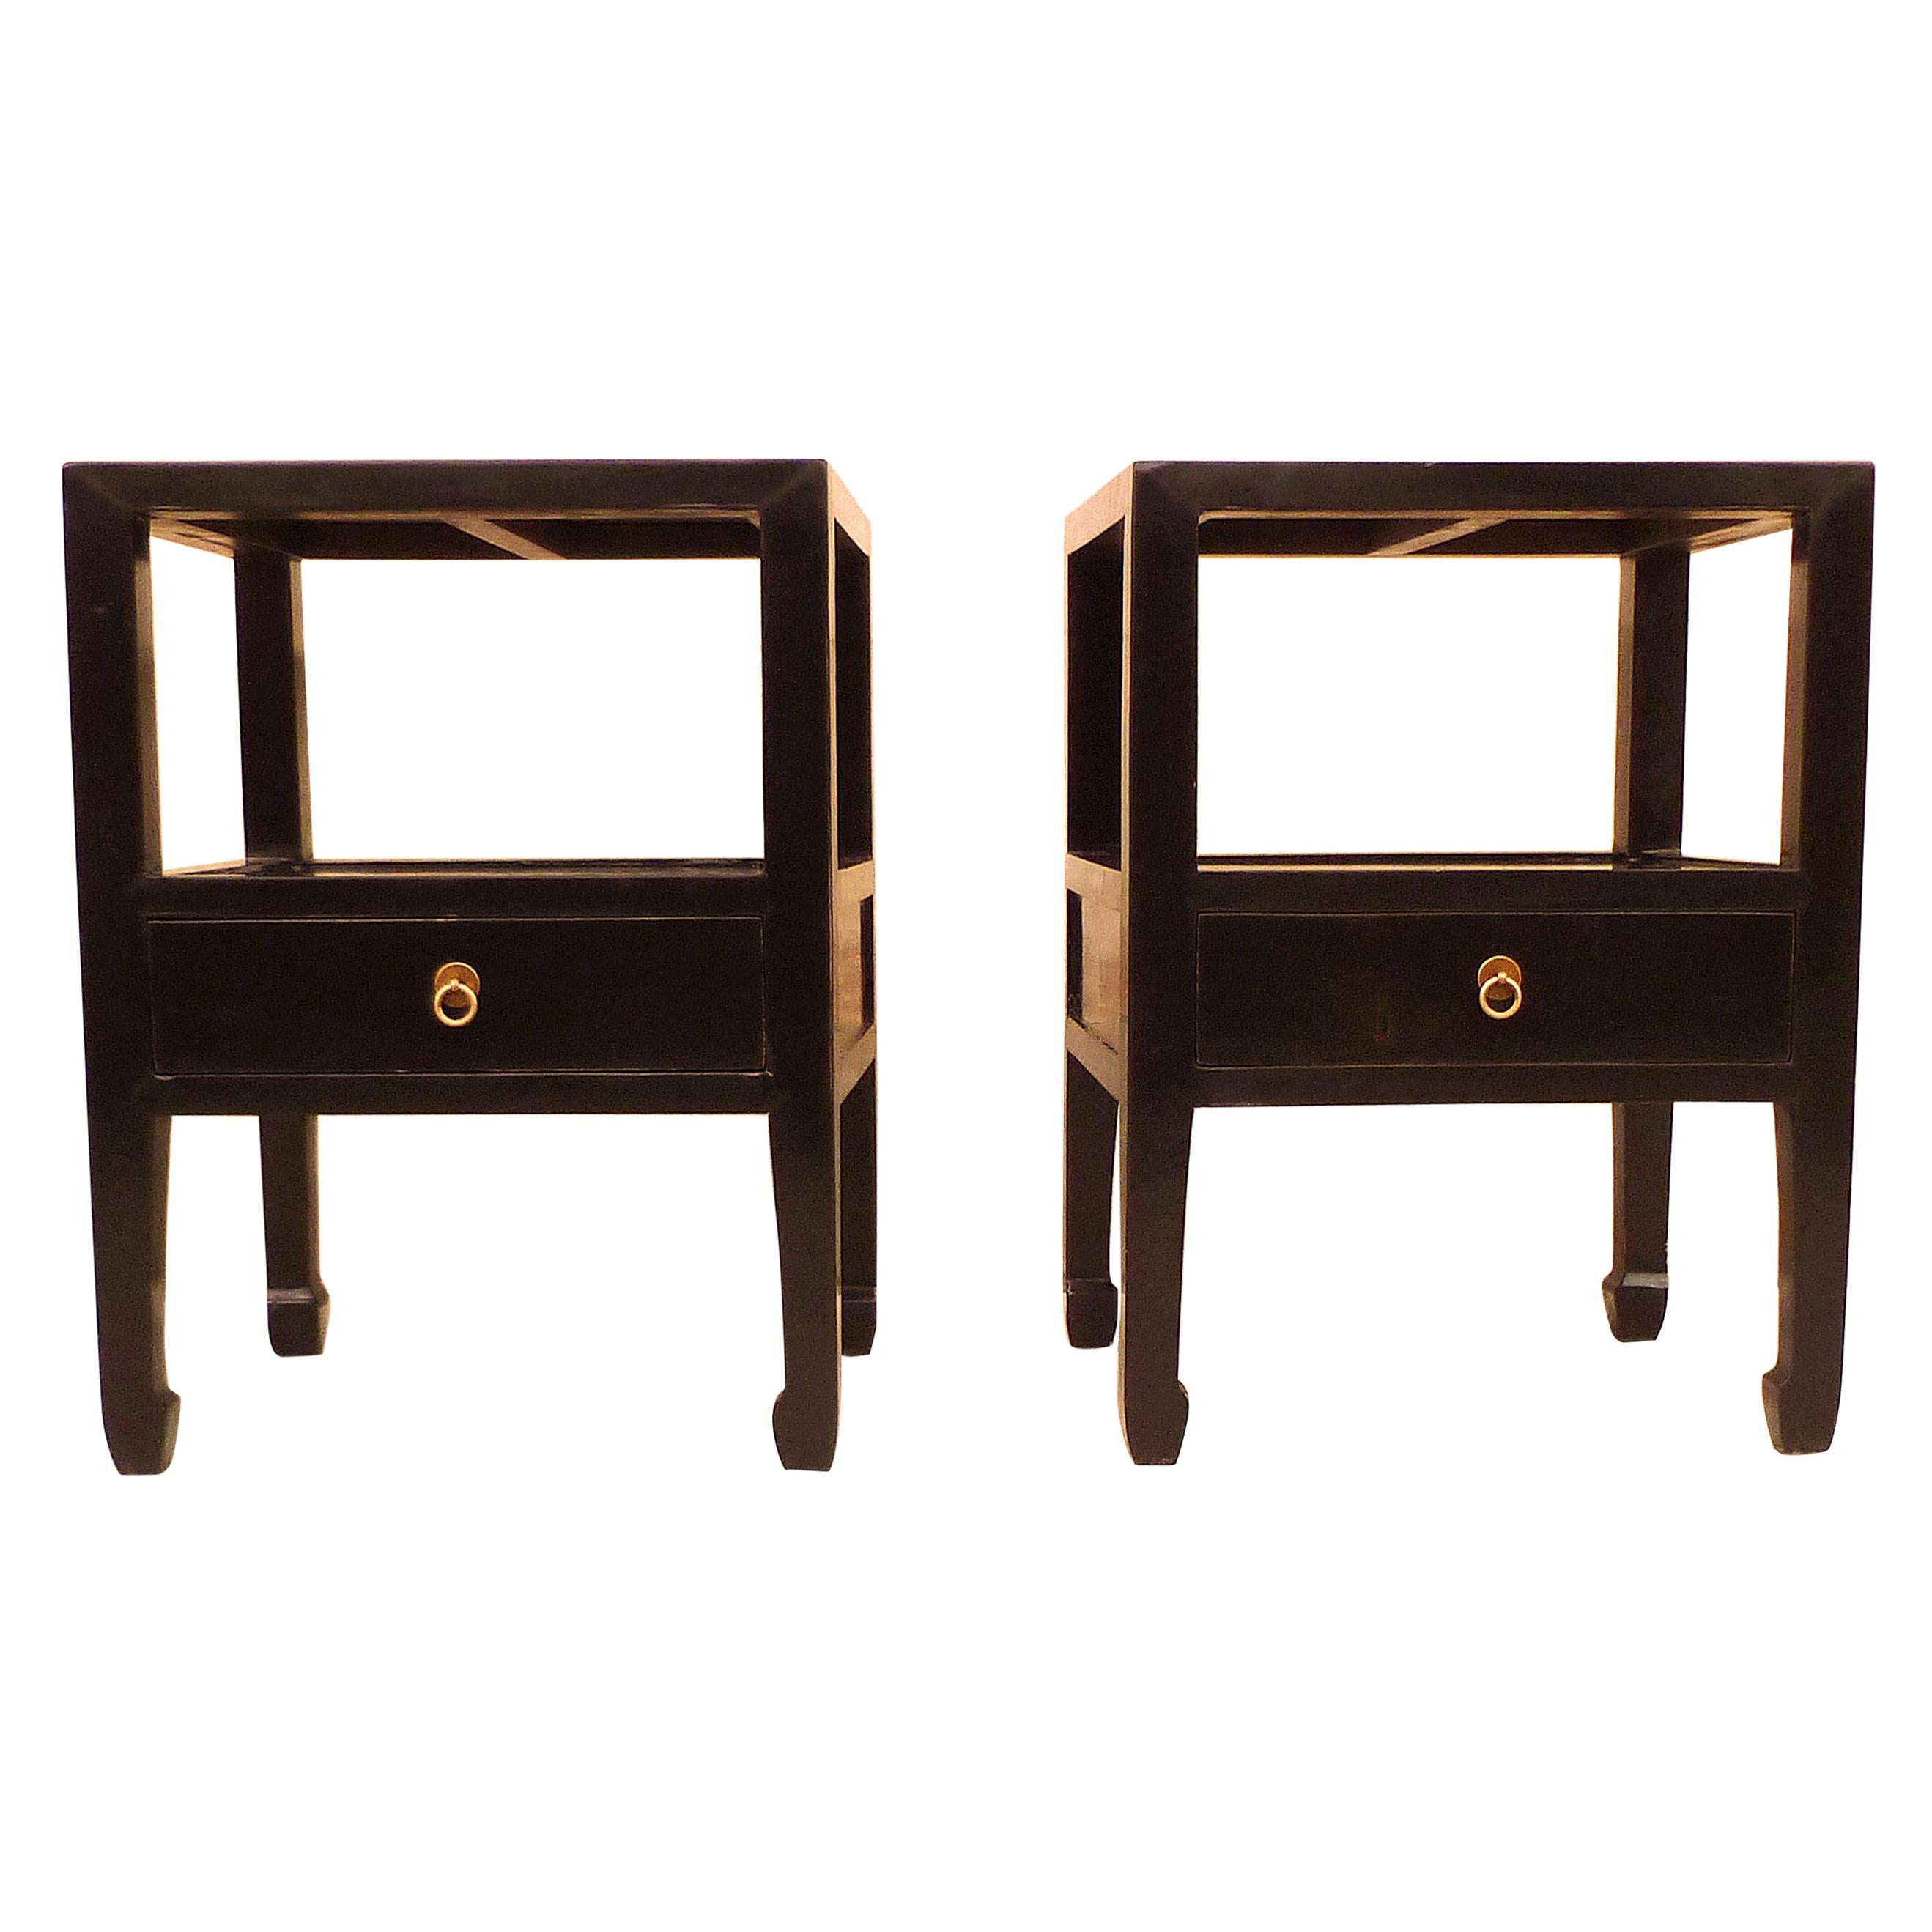 Pair of Fine Black Lacquer End Tables